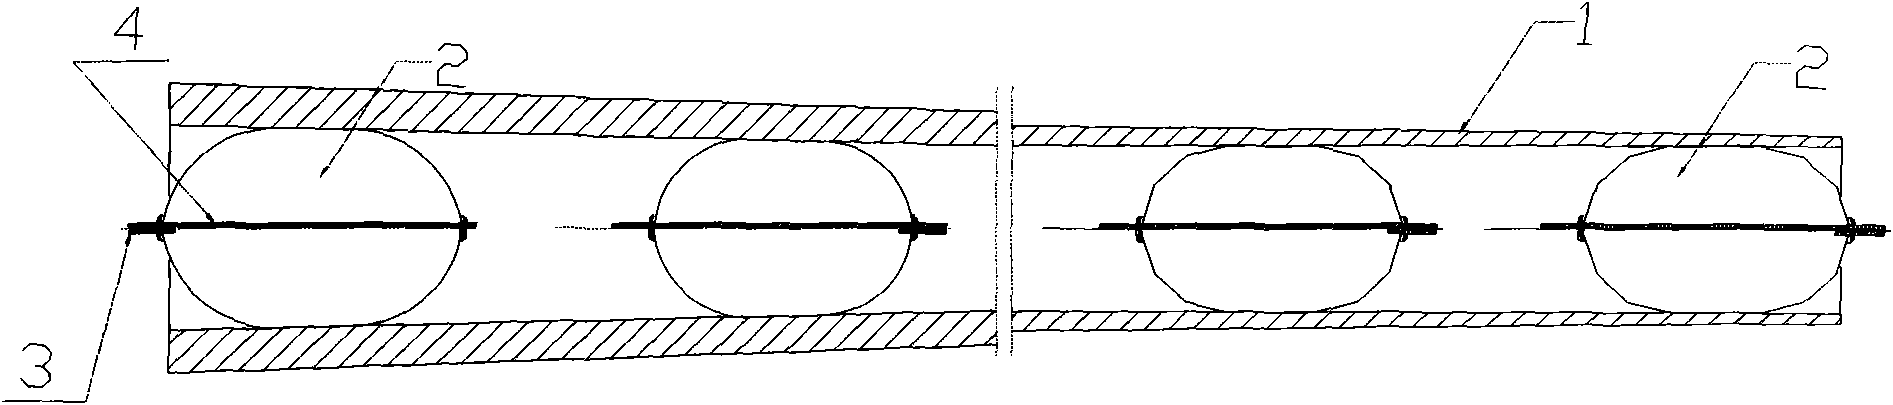 Method for floating tubular member by airbags